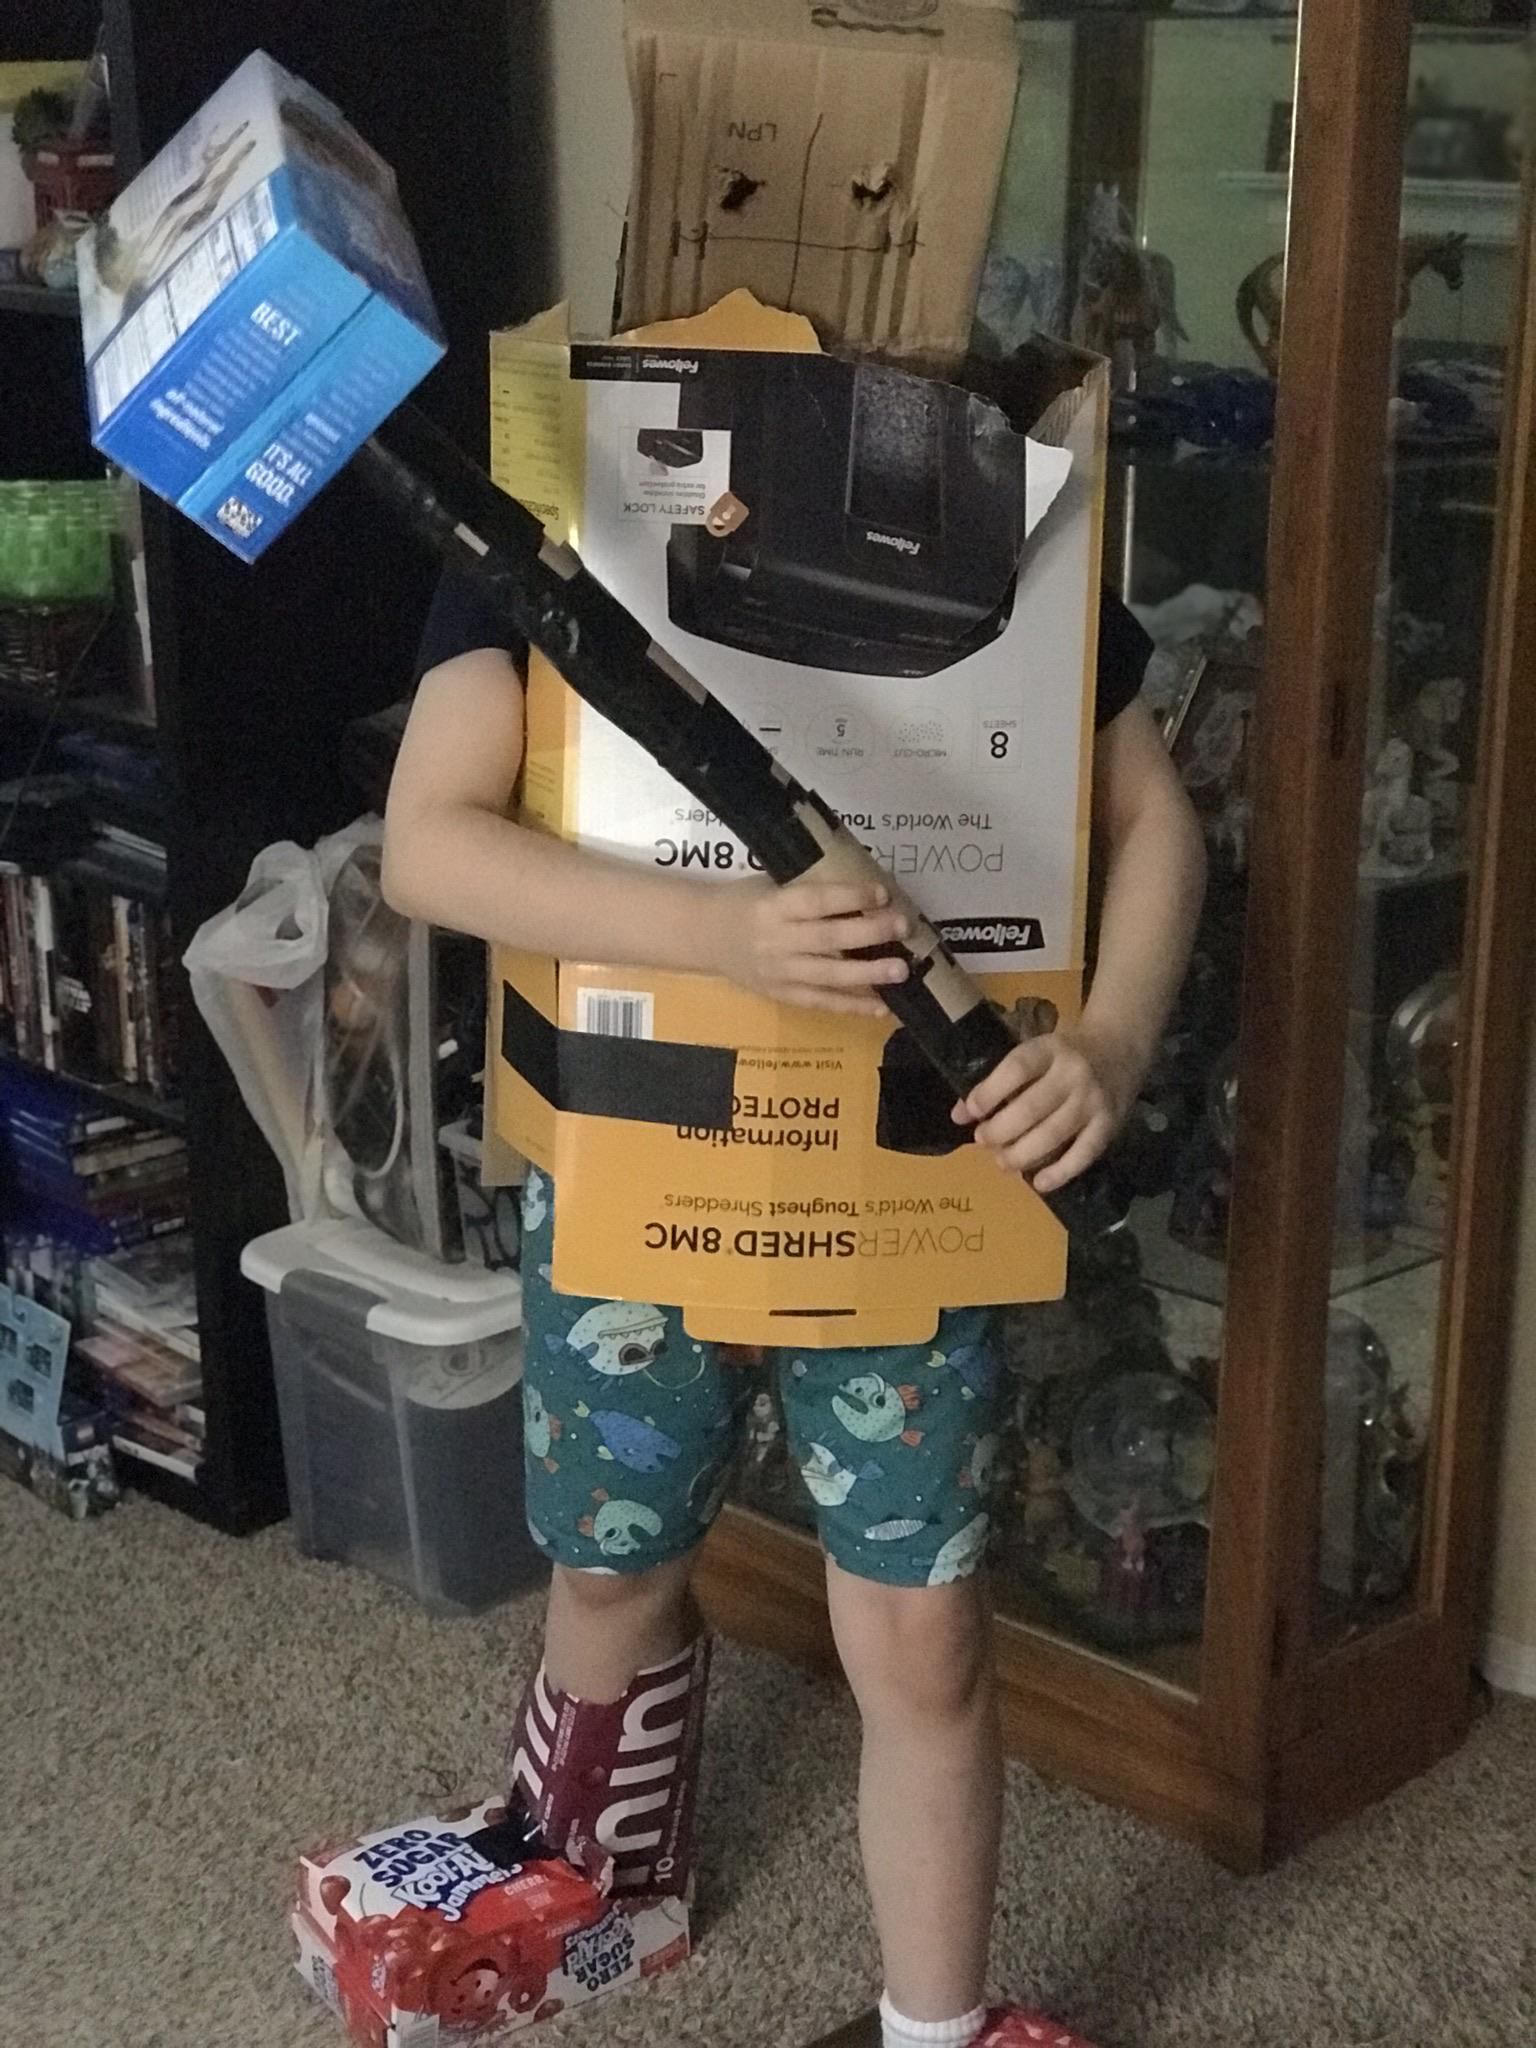 My 10yo son wanted me to share with all of you the suit of armor he’s been constructing.